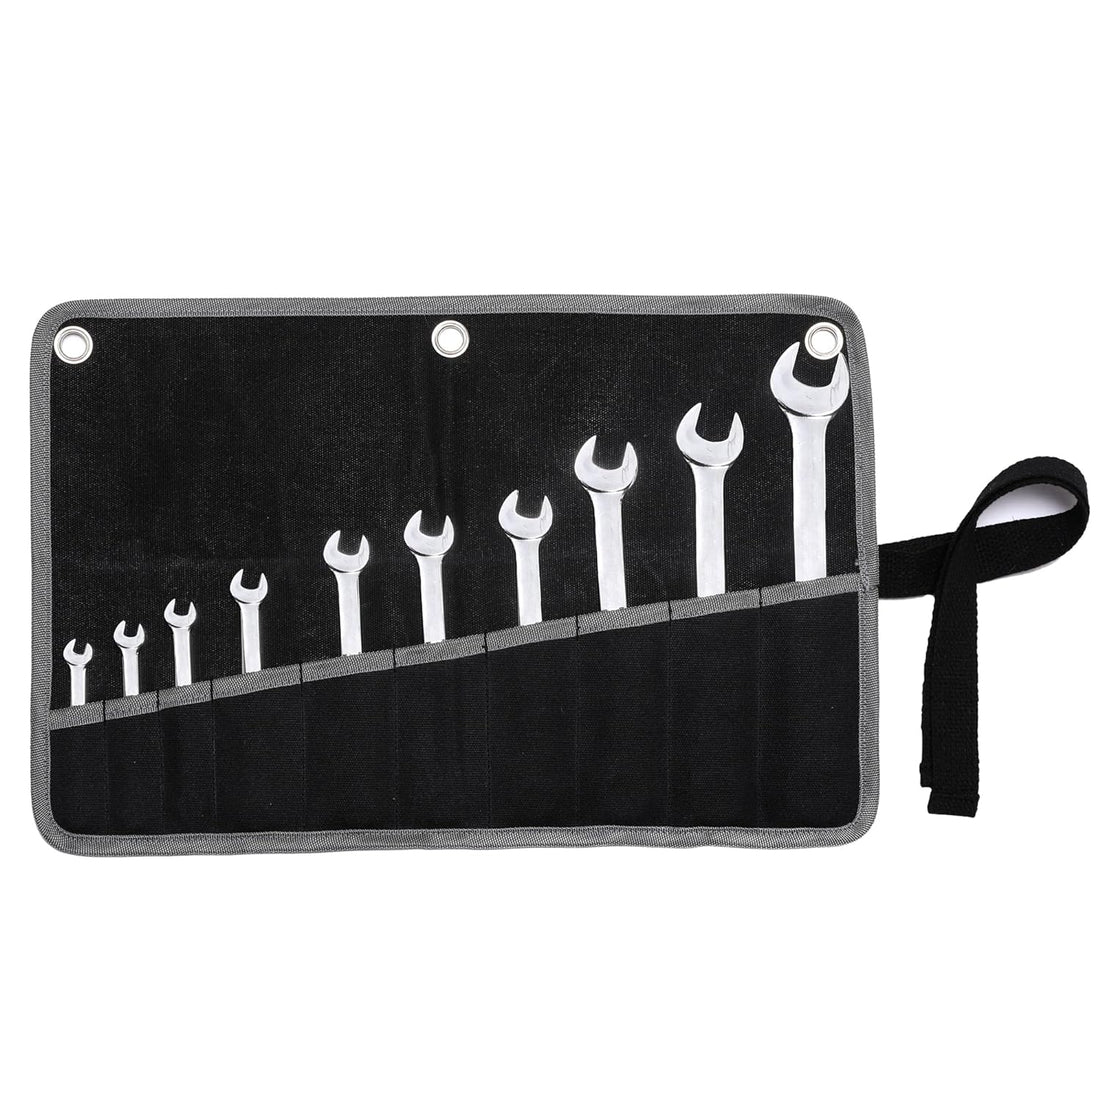 Wrench Tool Roll, 16OZ Waxed Canvas Wrench Organizer with 10 Pockets & Hanging Grommets, Tool Roll Bag for Metric & SAE Wrenches | Black